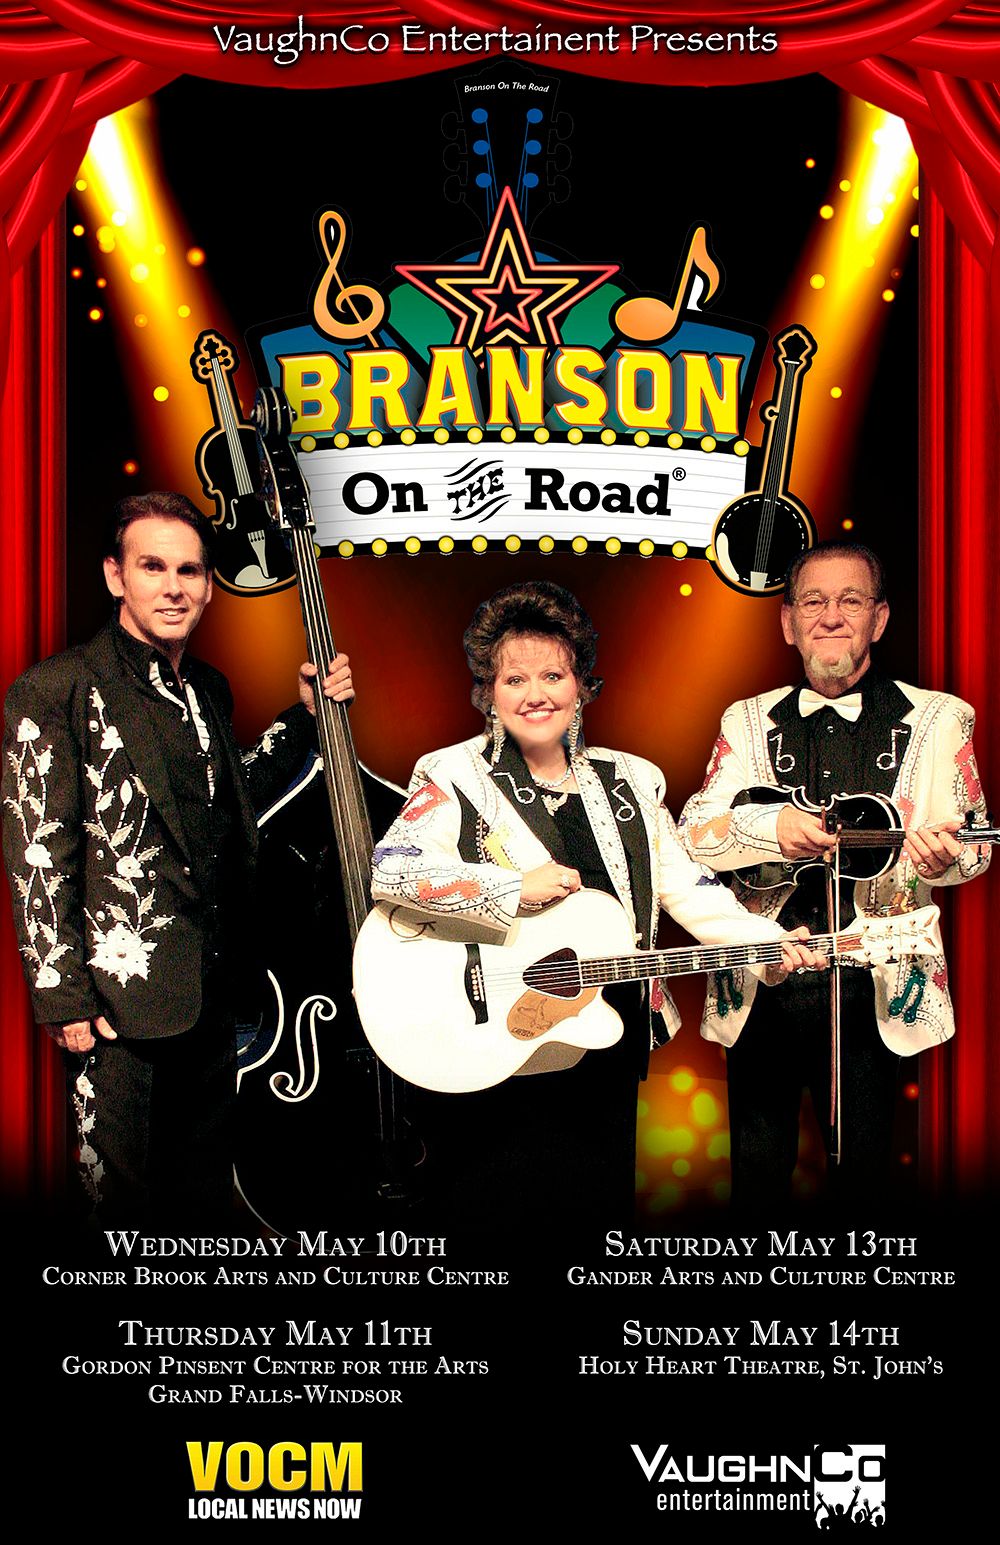 Branson on the Road